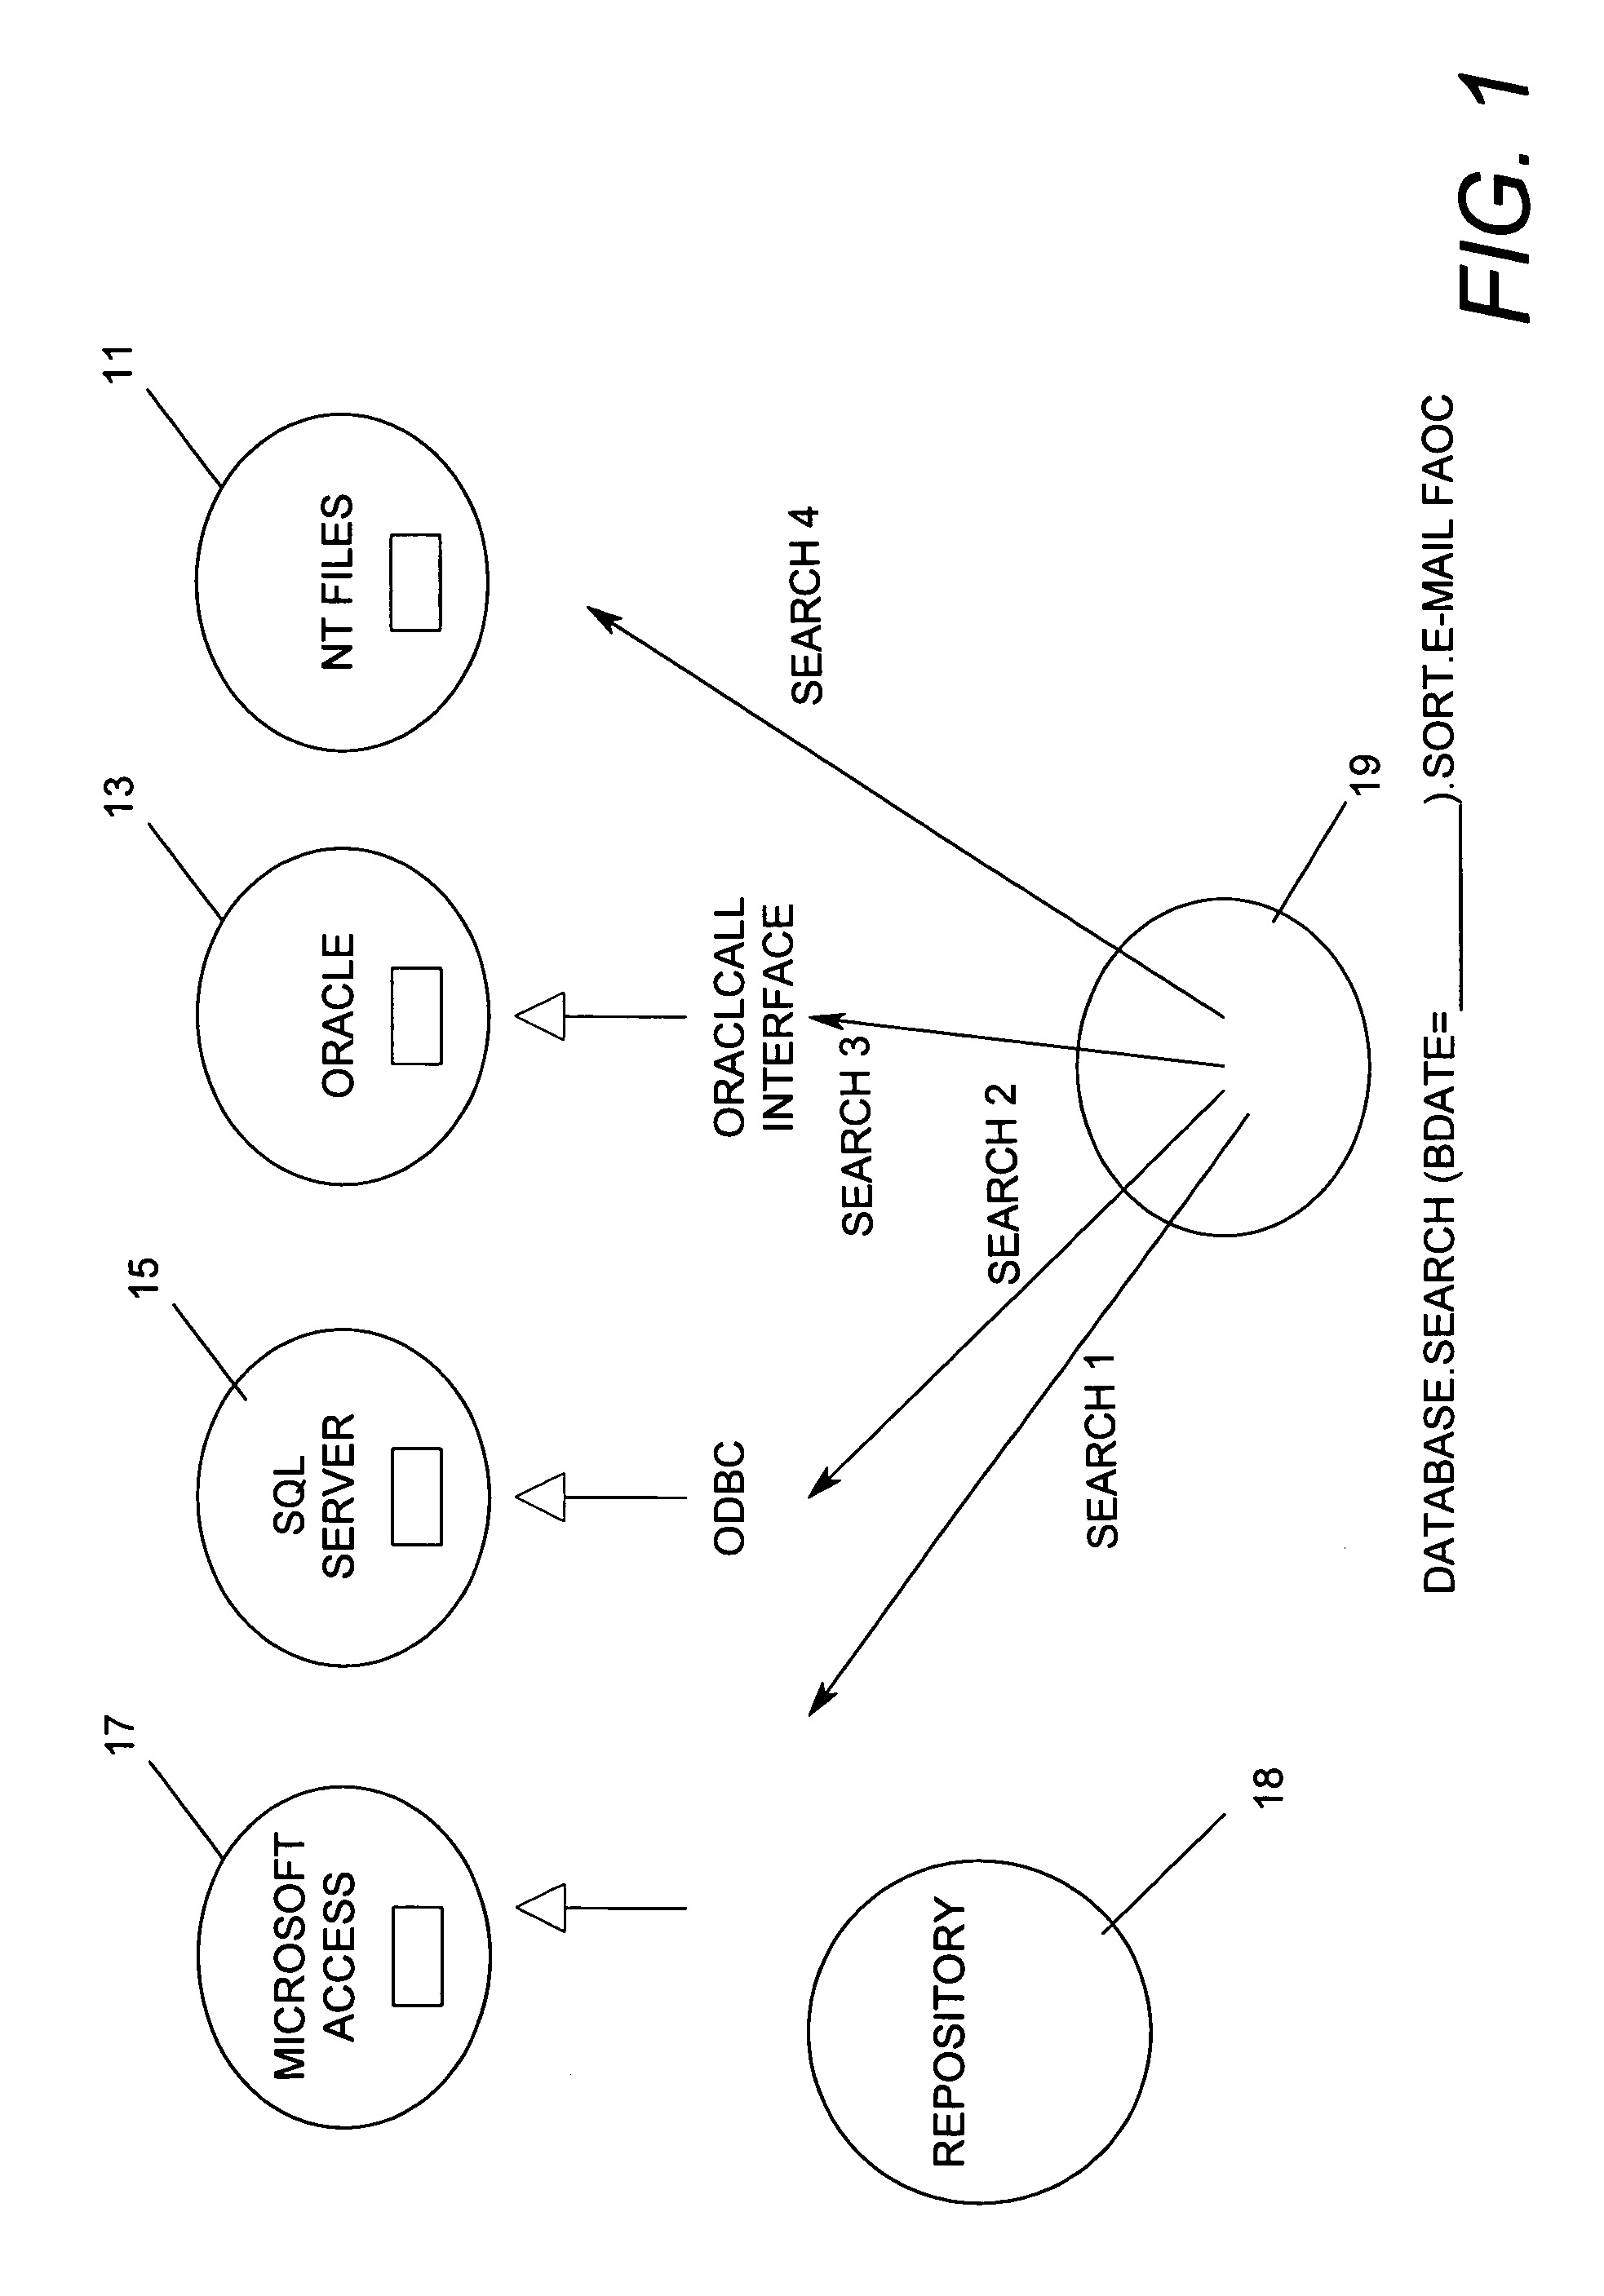 Method and apparatus for automatic execution of concatenated methods across multiple heterogeneous data sources